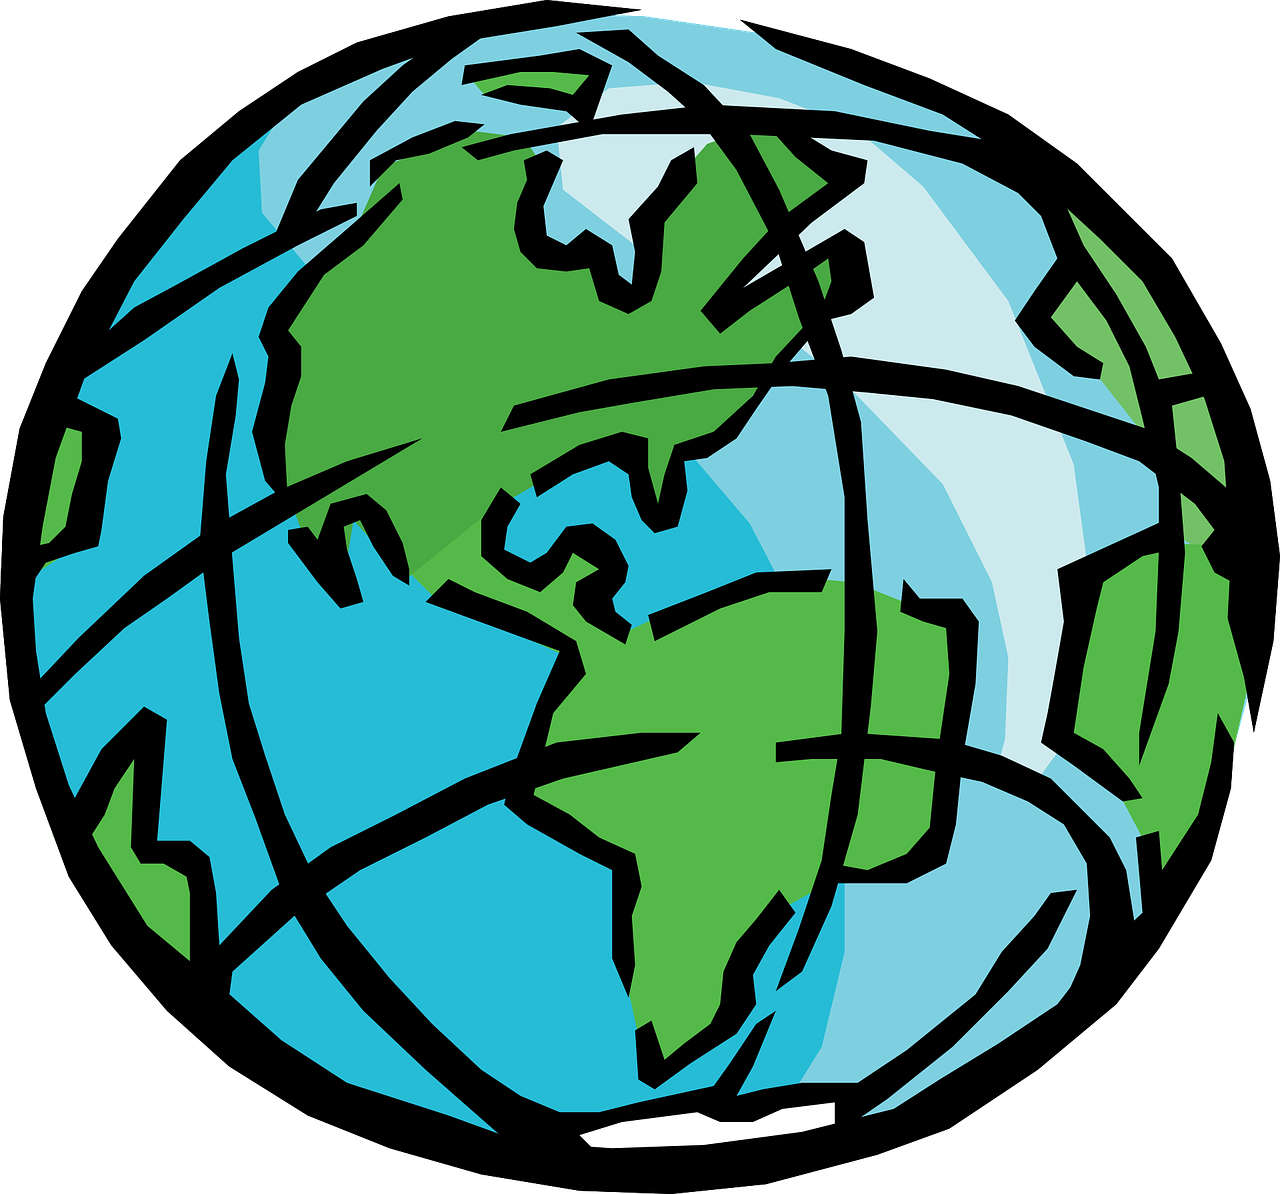 a drawing of a globe on a black background, cartoonish graphic style, full color illustration, clipart, black blue green